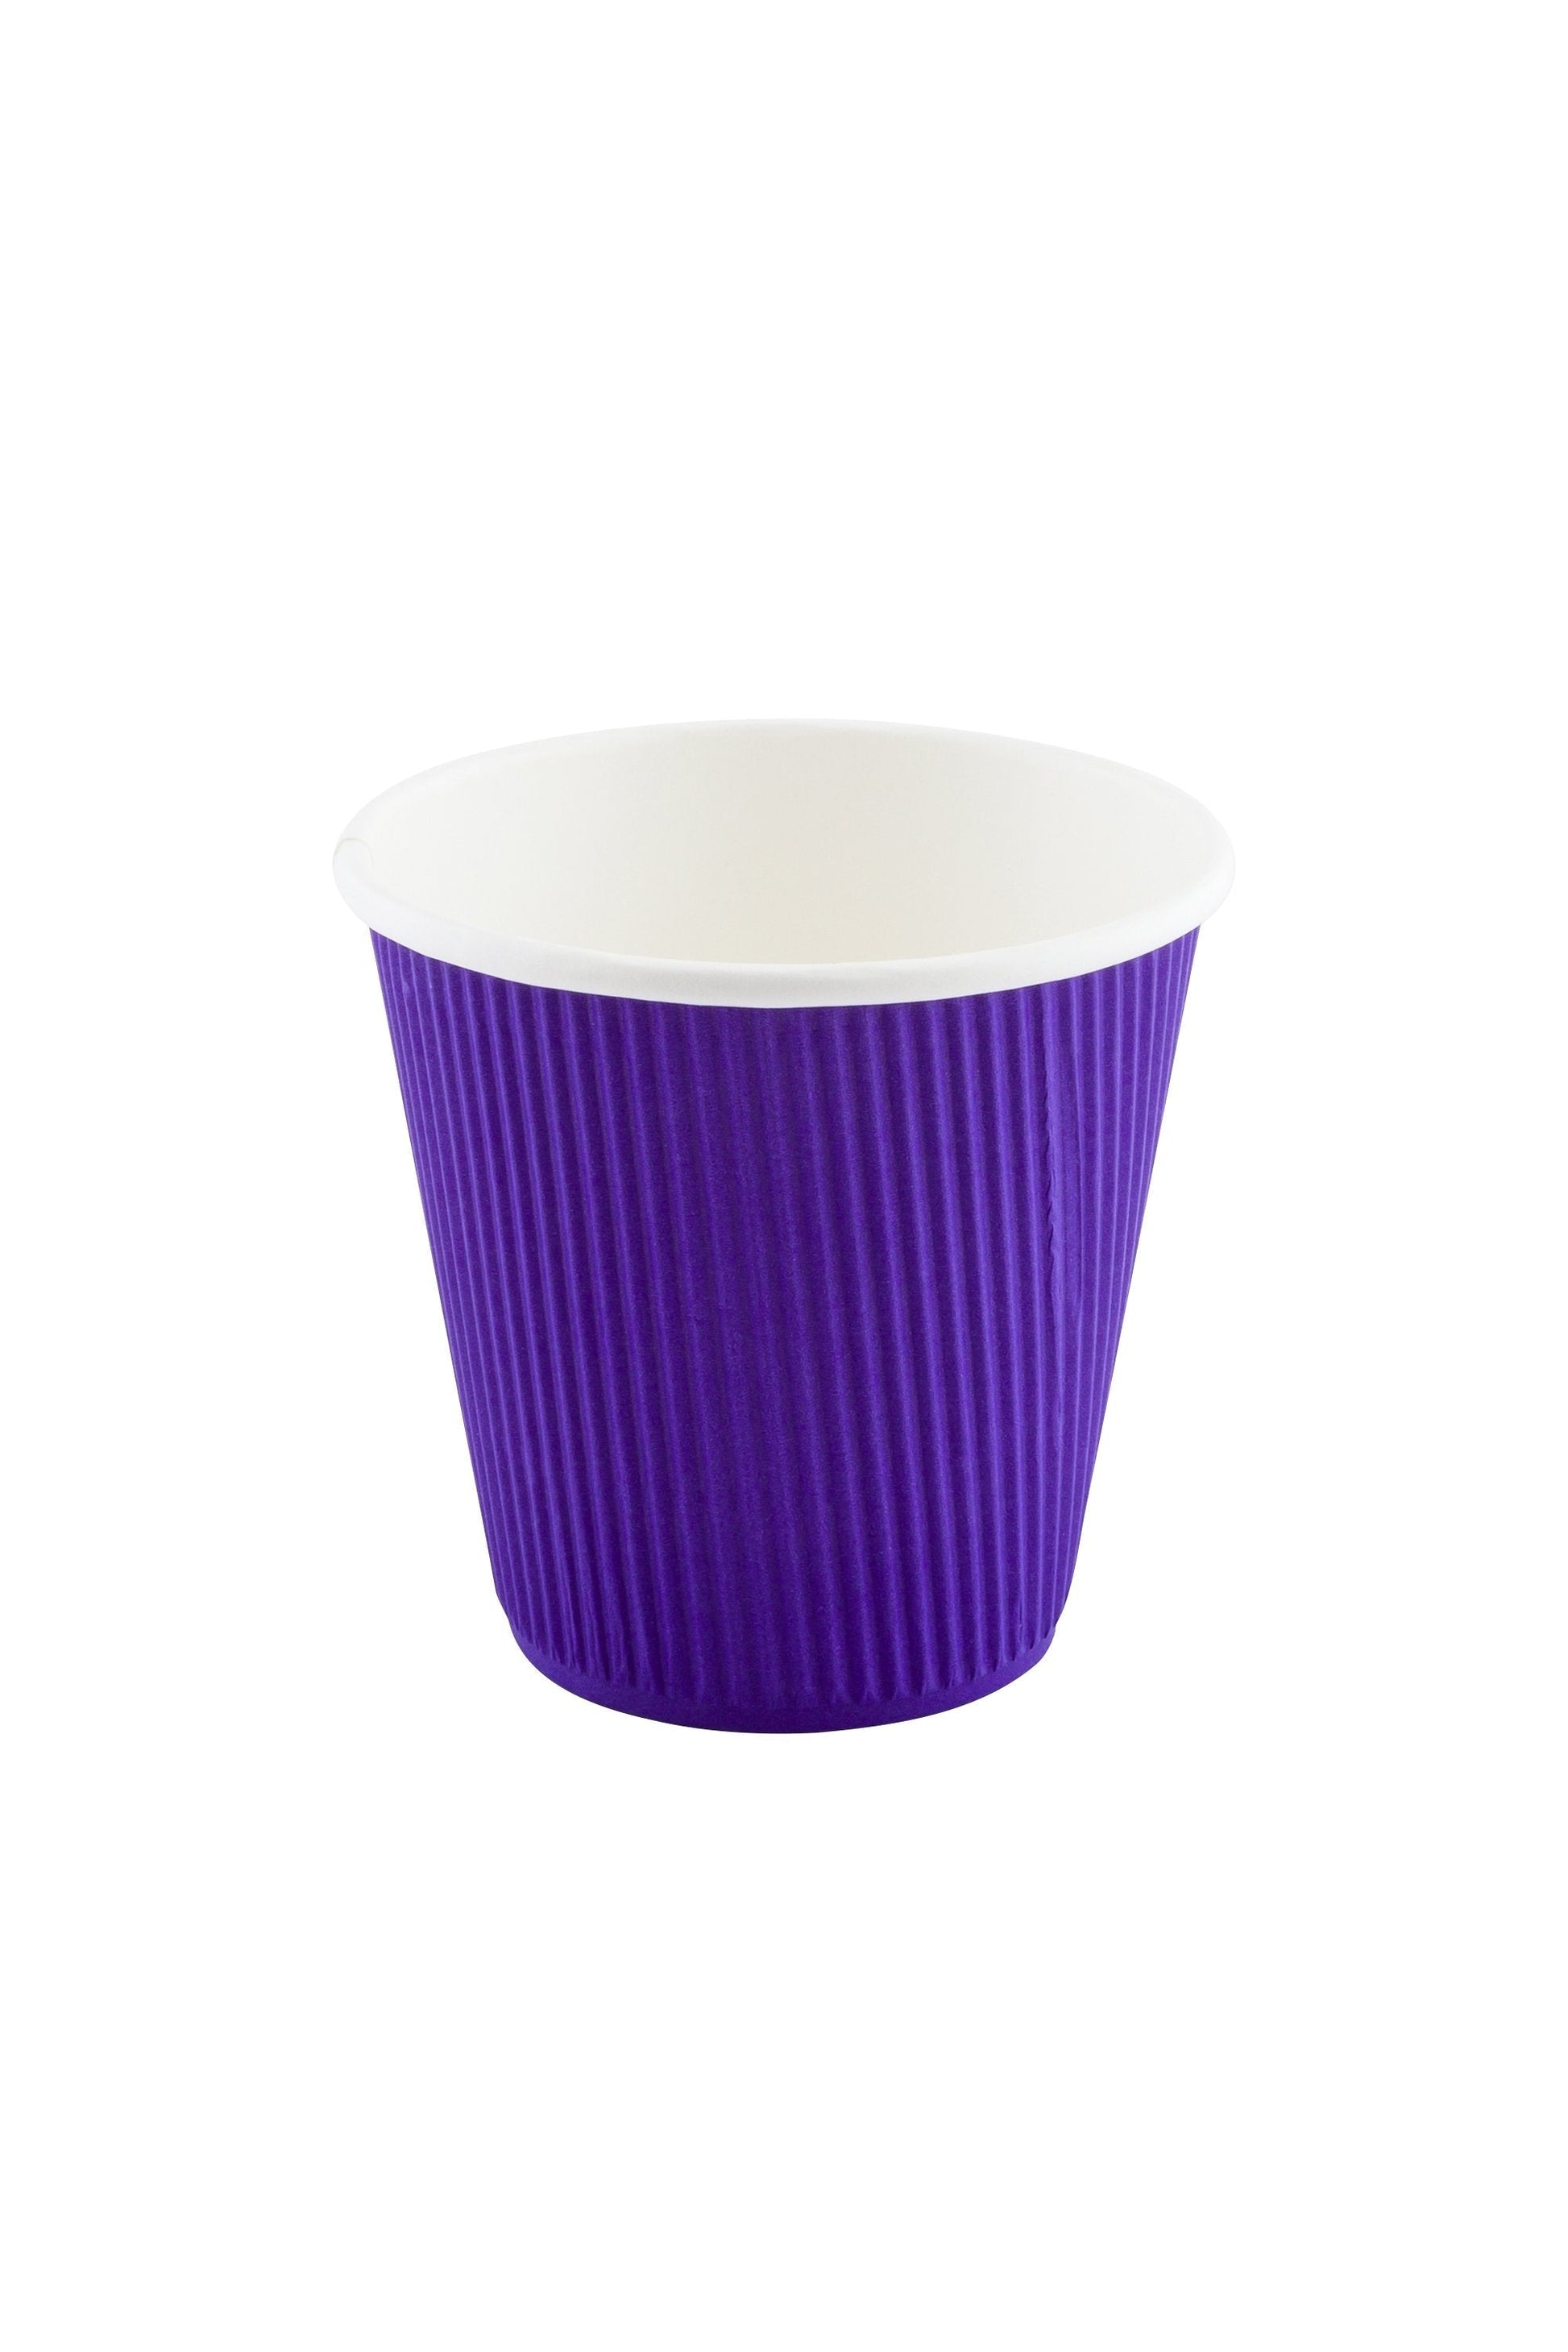 8 oz Royal Purple Paper Coffee Cup - Ripple Wall - 3 1/2" x 3 1/2" x 3 1/4" - 500 count boxwww.ecoware.ae                               